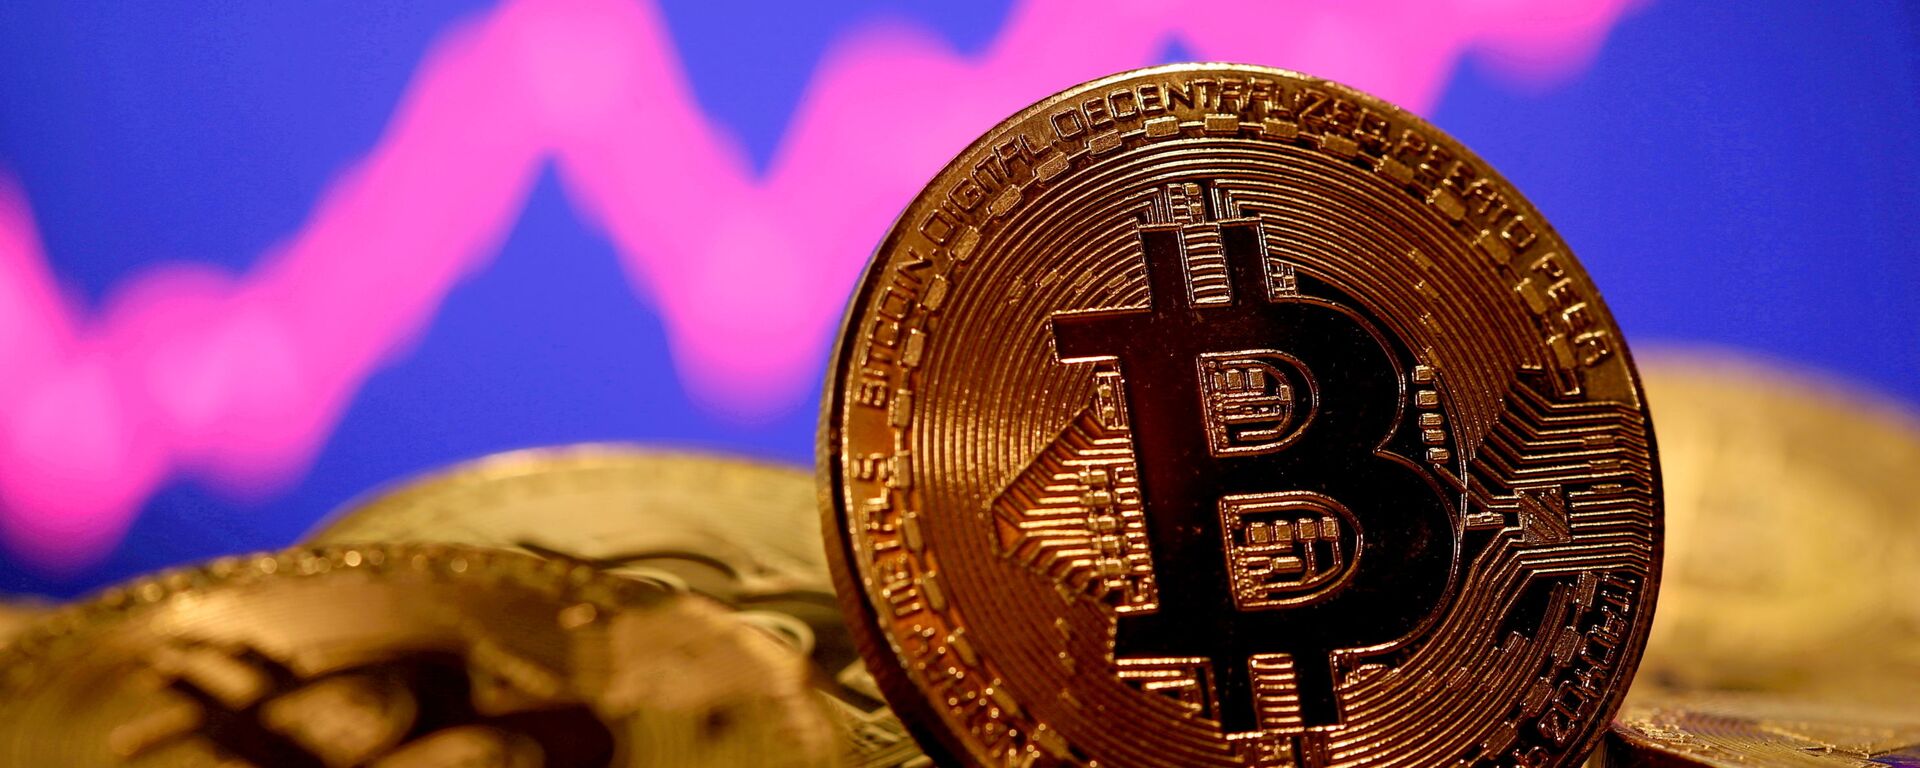 A representation of virtual currency Bitcoin is seen in front of a stock graph in this illustration taken January 8, 2021 - Sputnik International, 1920, 18.05.2022